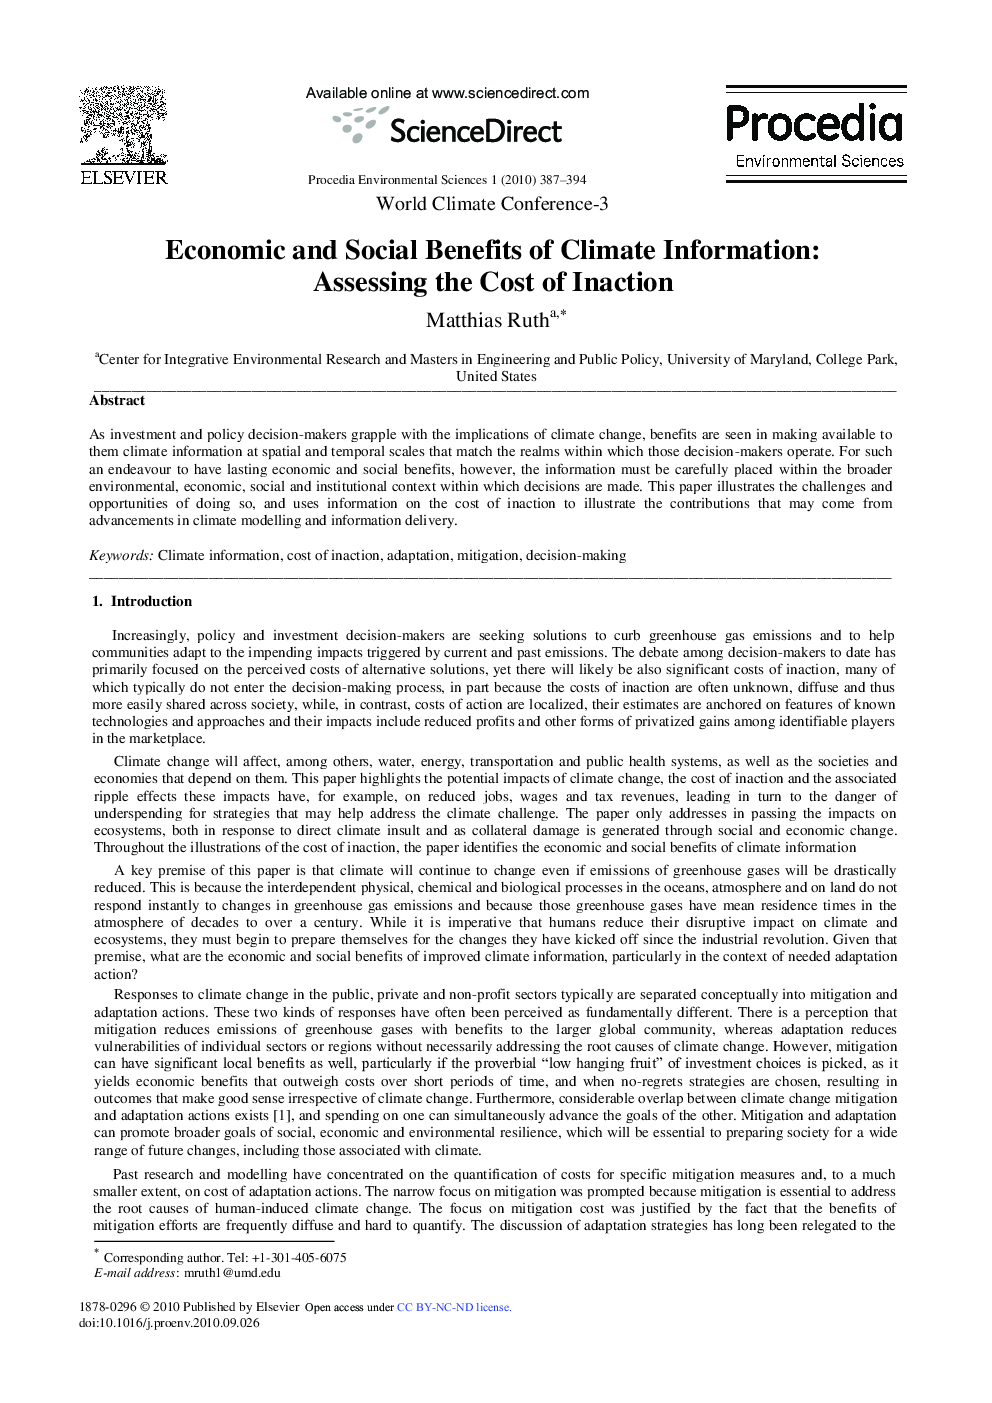 Economic and Social Benefits of Climate Information: Assessing the Cost of Inaction